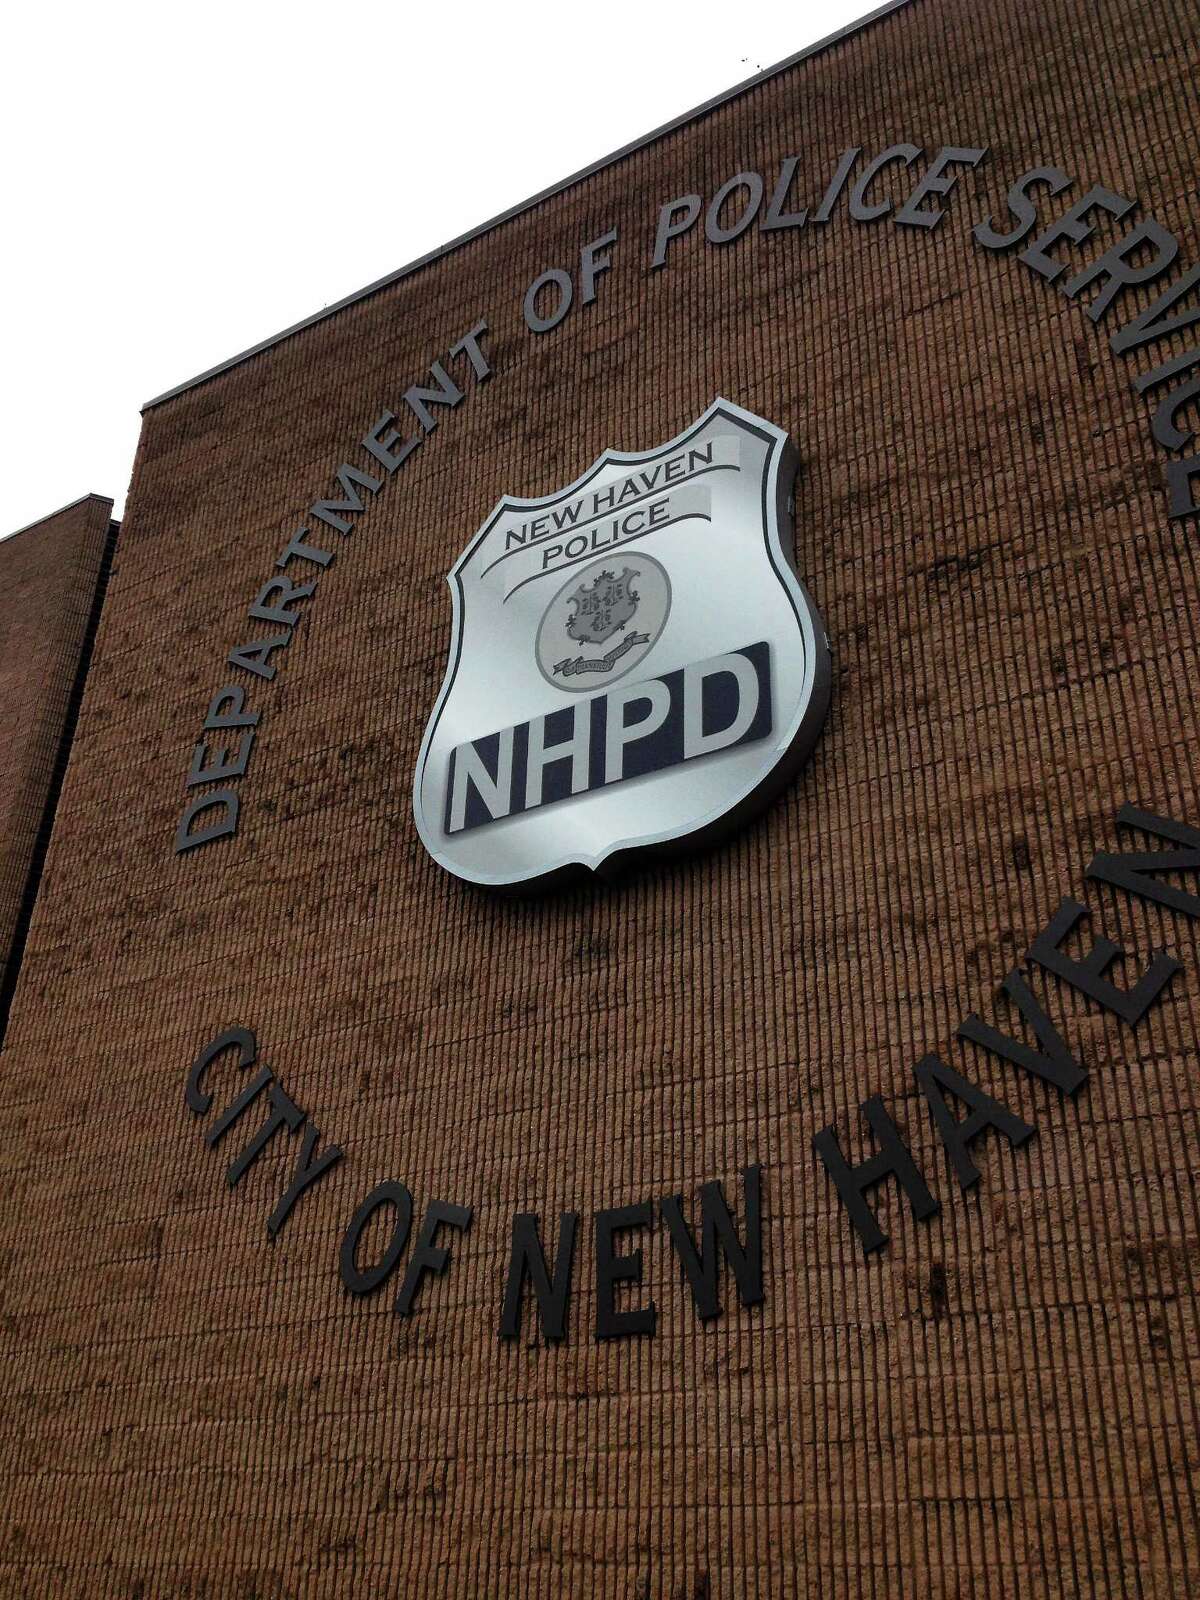 newhaven police blotter